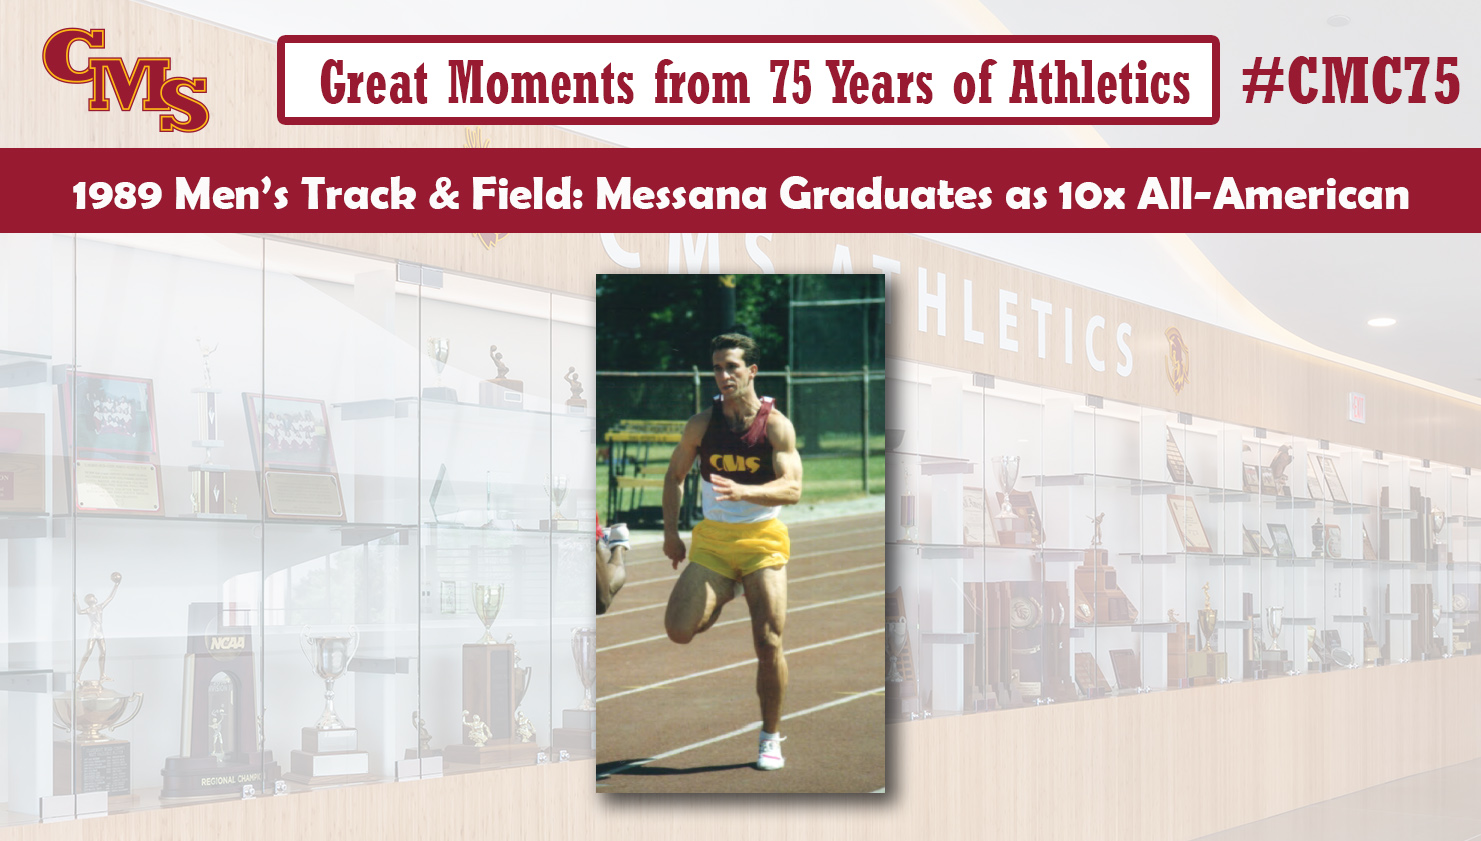 Mark Messana action shot. Words over the photo read: Great Moments from 75 Years of Athletics. 1989 Men's Track & Field: Messana Graduates as 10x All-American